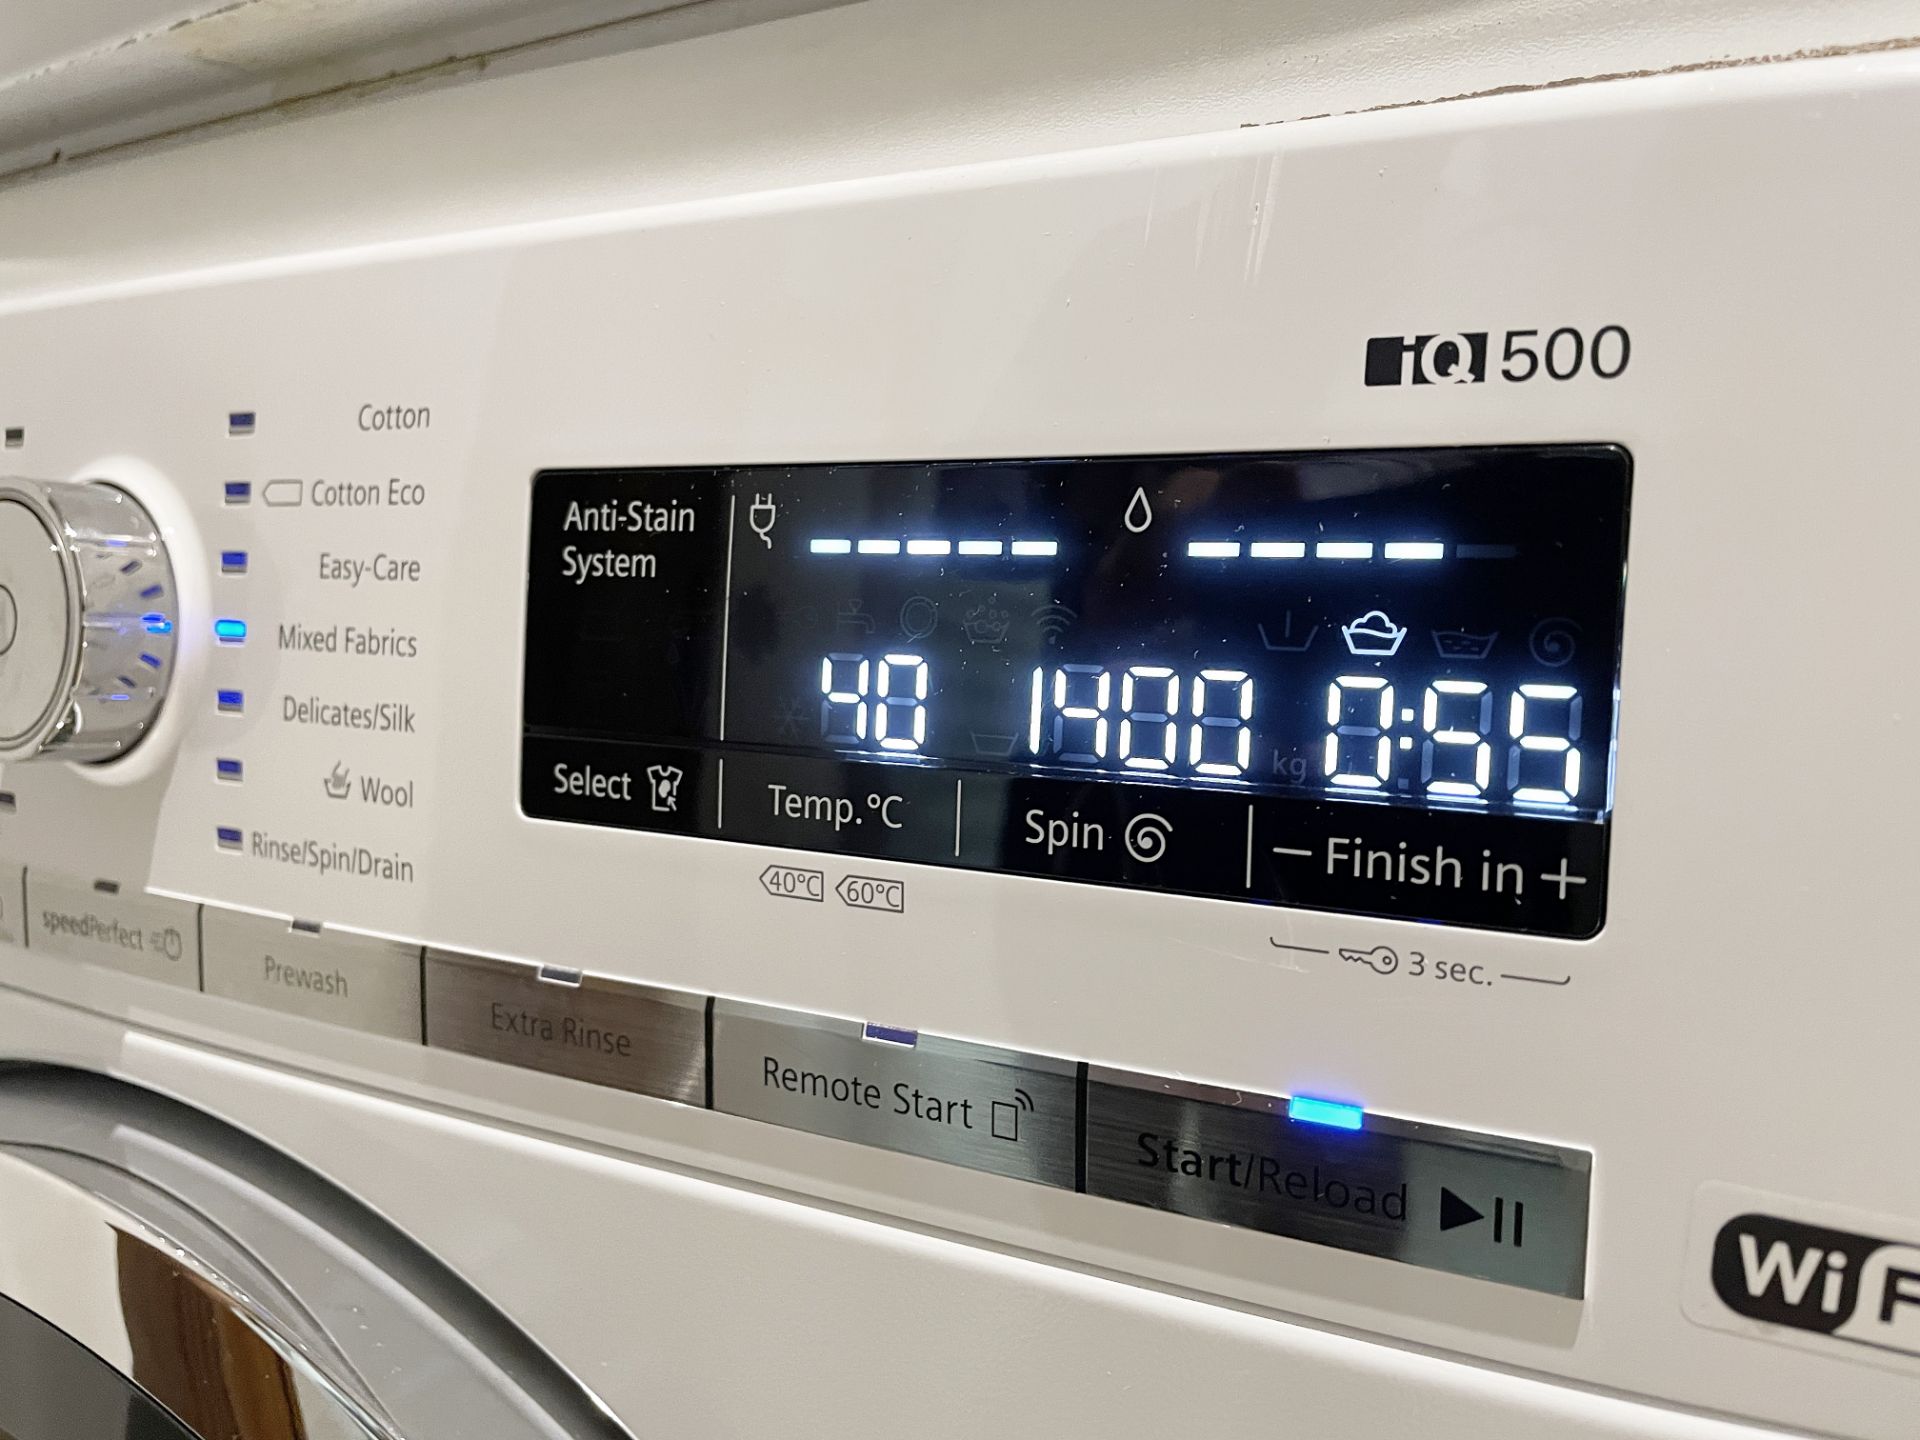 1 x Siemens IQ-500 Integrated 8Kg Washing Machine with 1400 rpm - White - C Rated - Dimensions: - Image 2 of 3